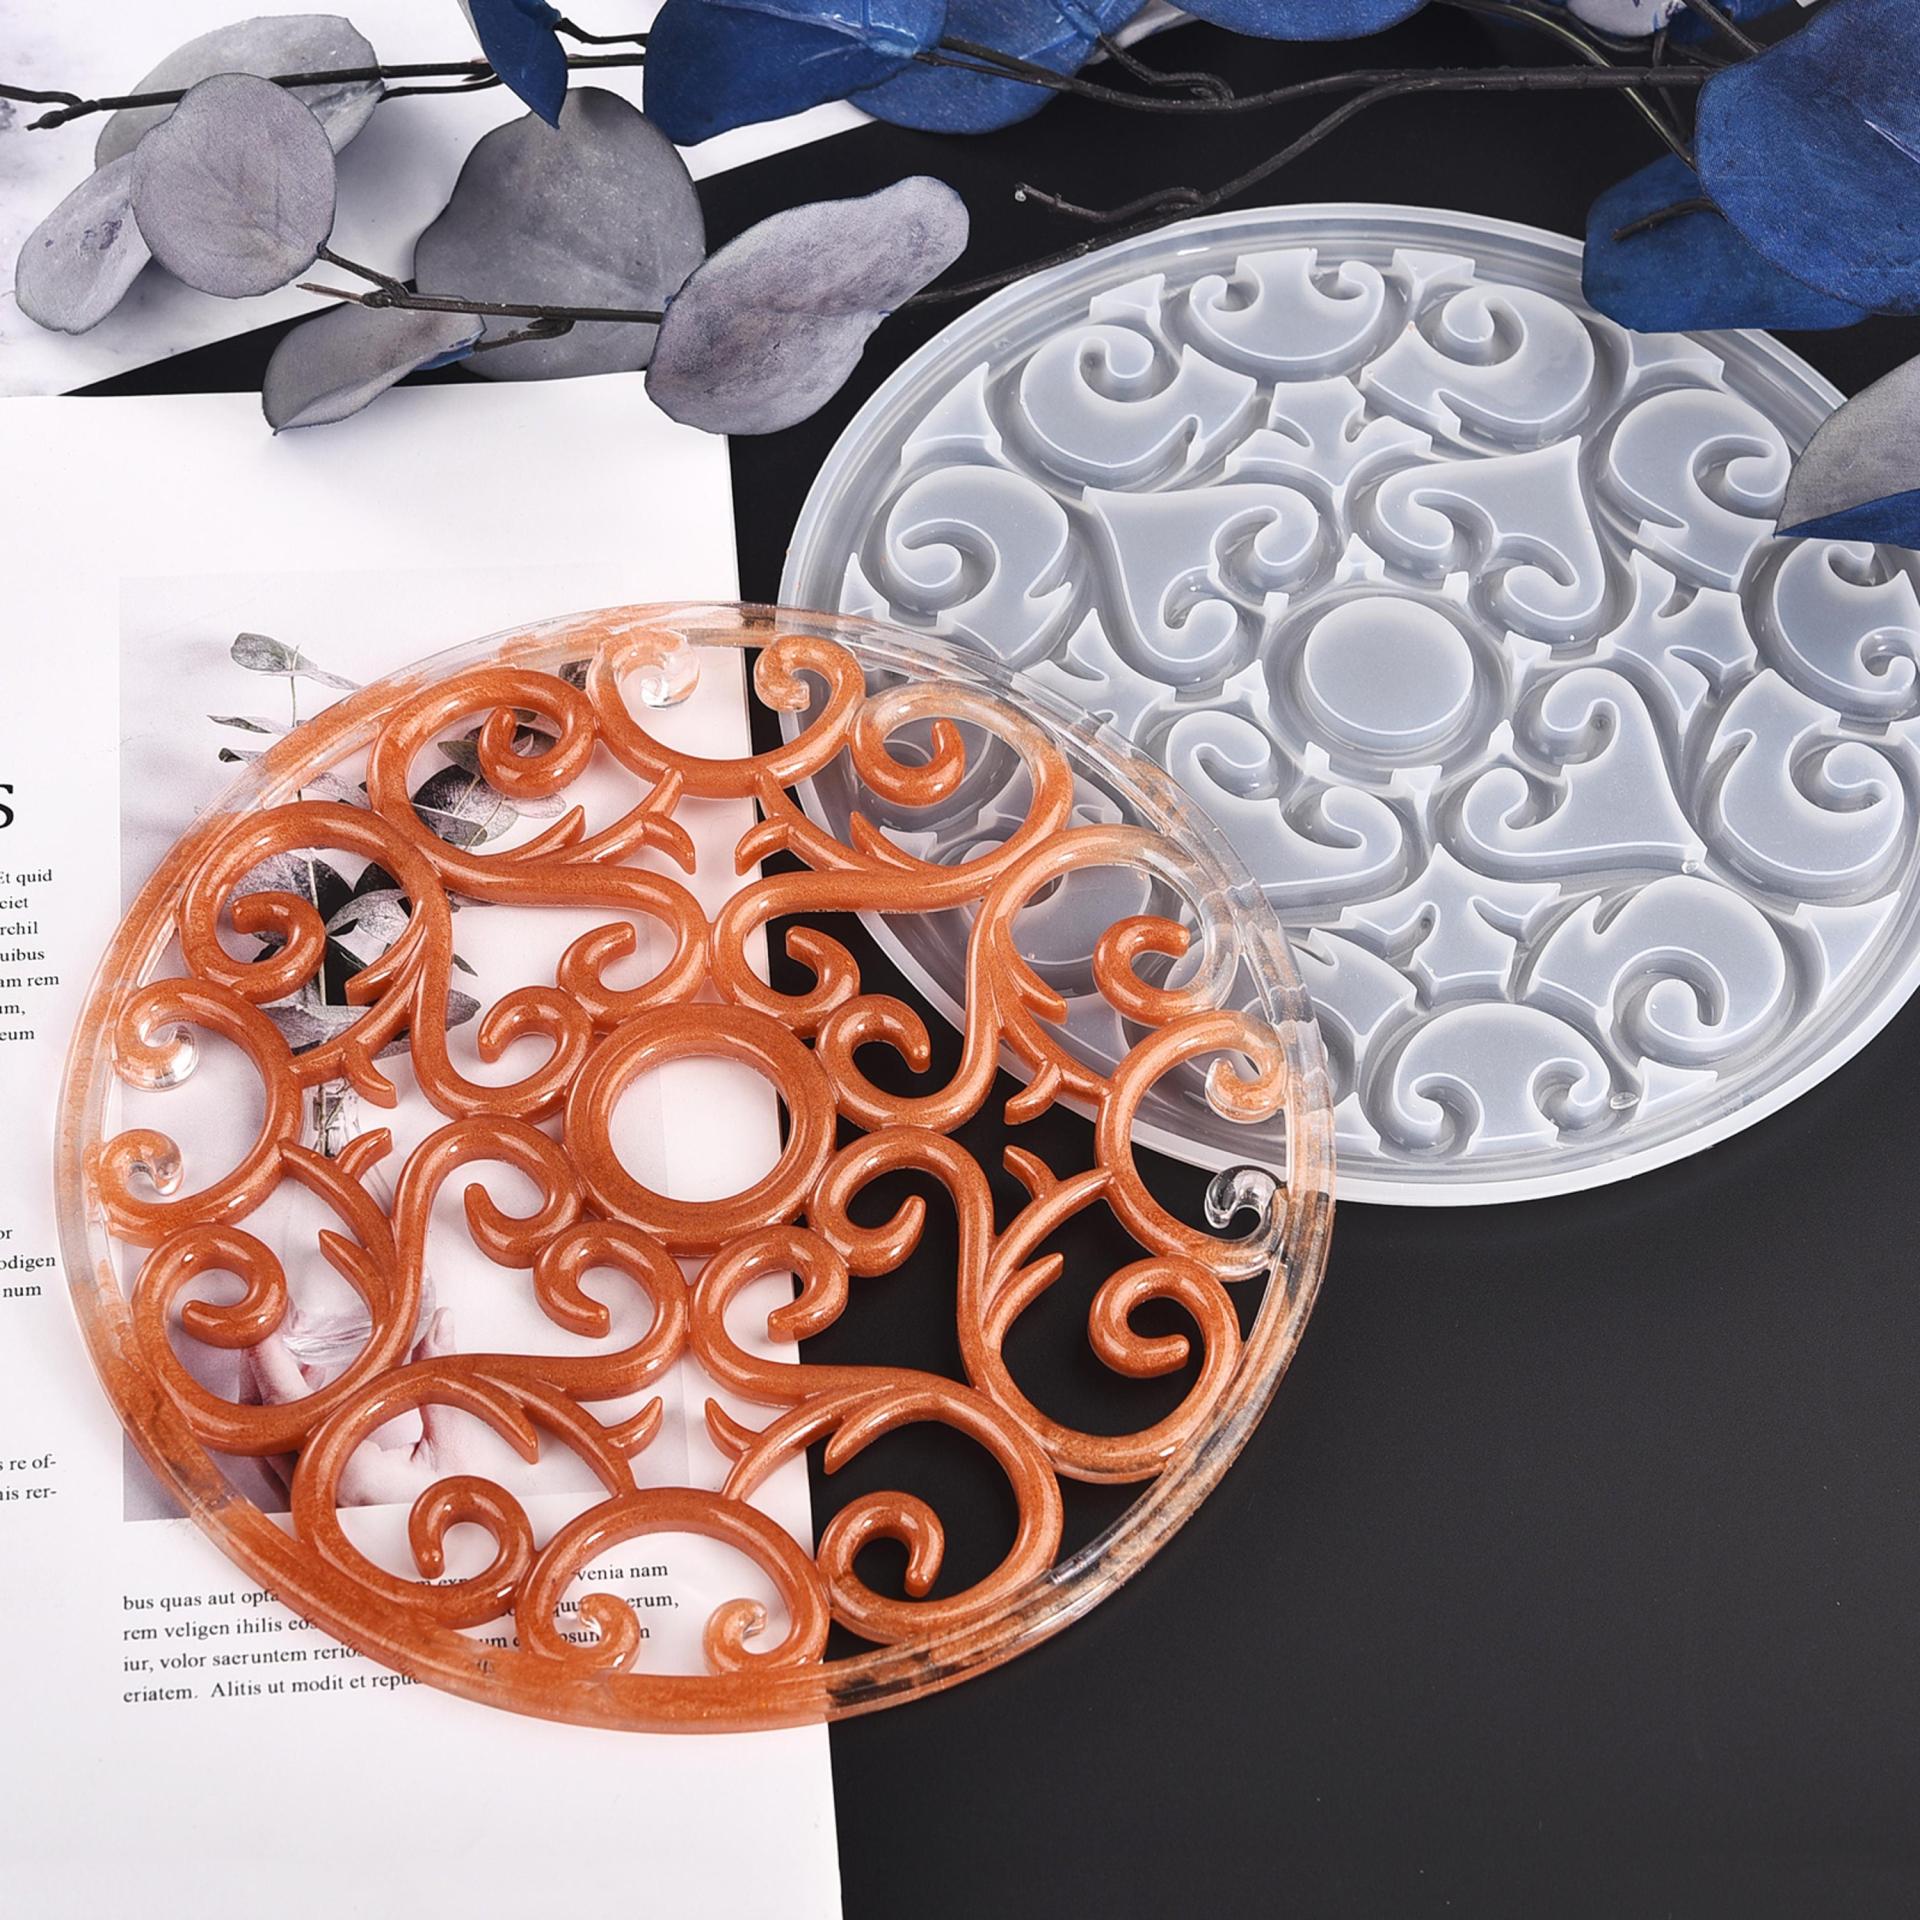 Molds - Mandala Tray Casting Molds - for Epoxy, Clay or other casting medium